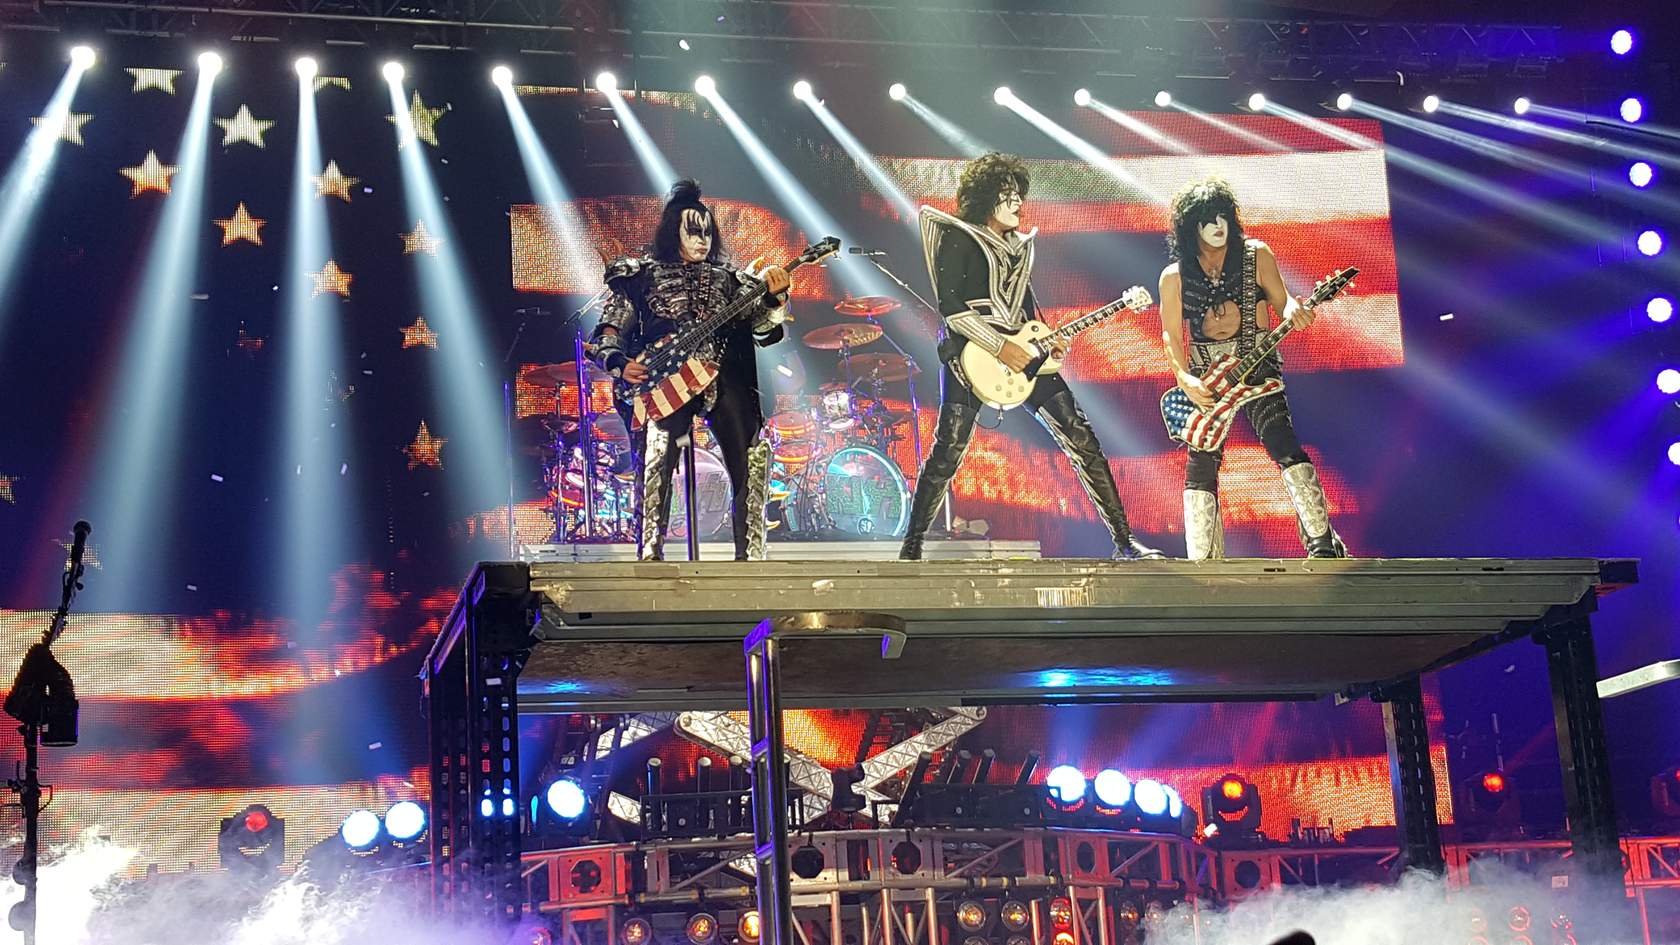 Kiss performs on stage in front of a patriotic flag, showcasing their relational framing.